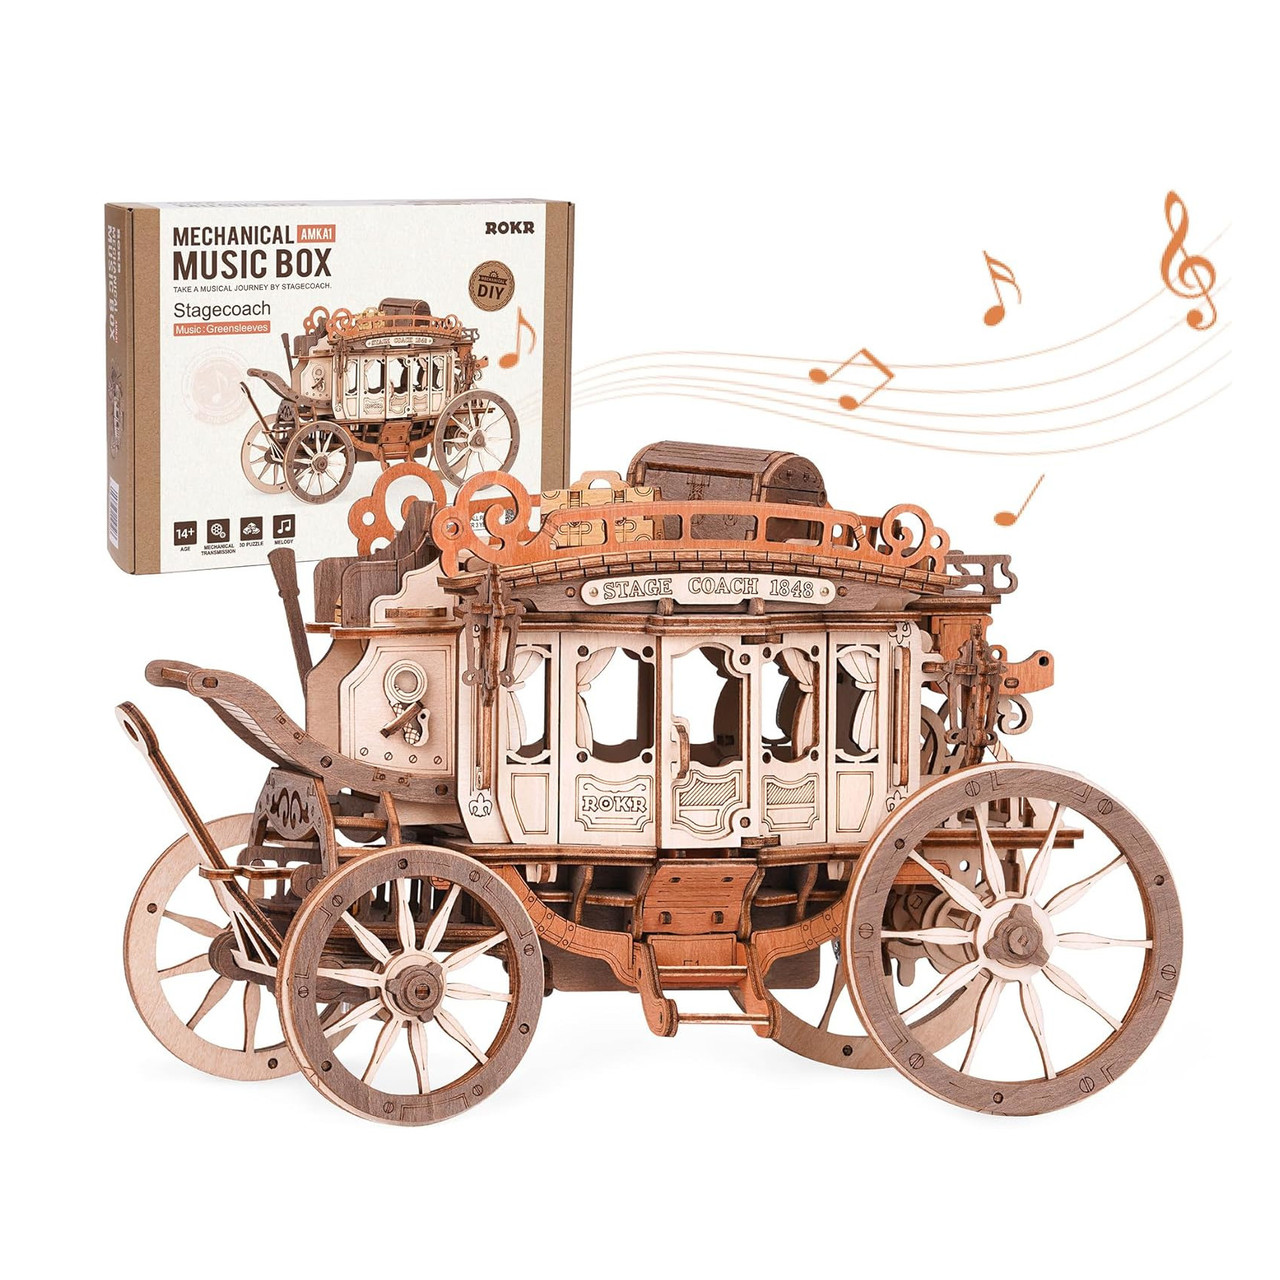 ROKR Stagecoach Mechanical Music Box 3D Wooden Puzzle AMKA1